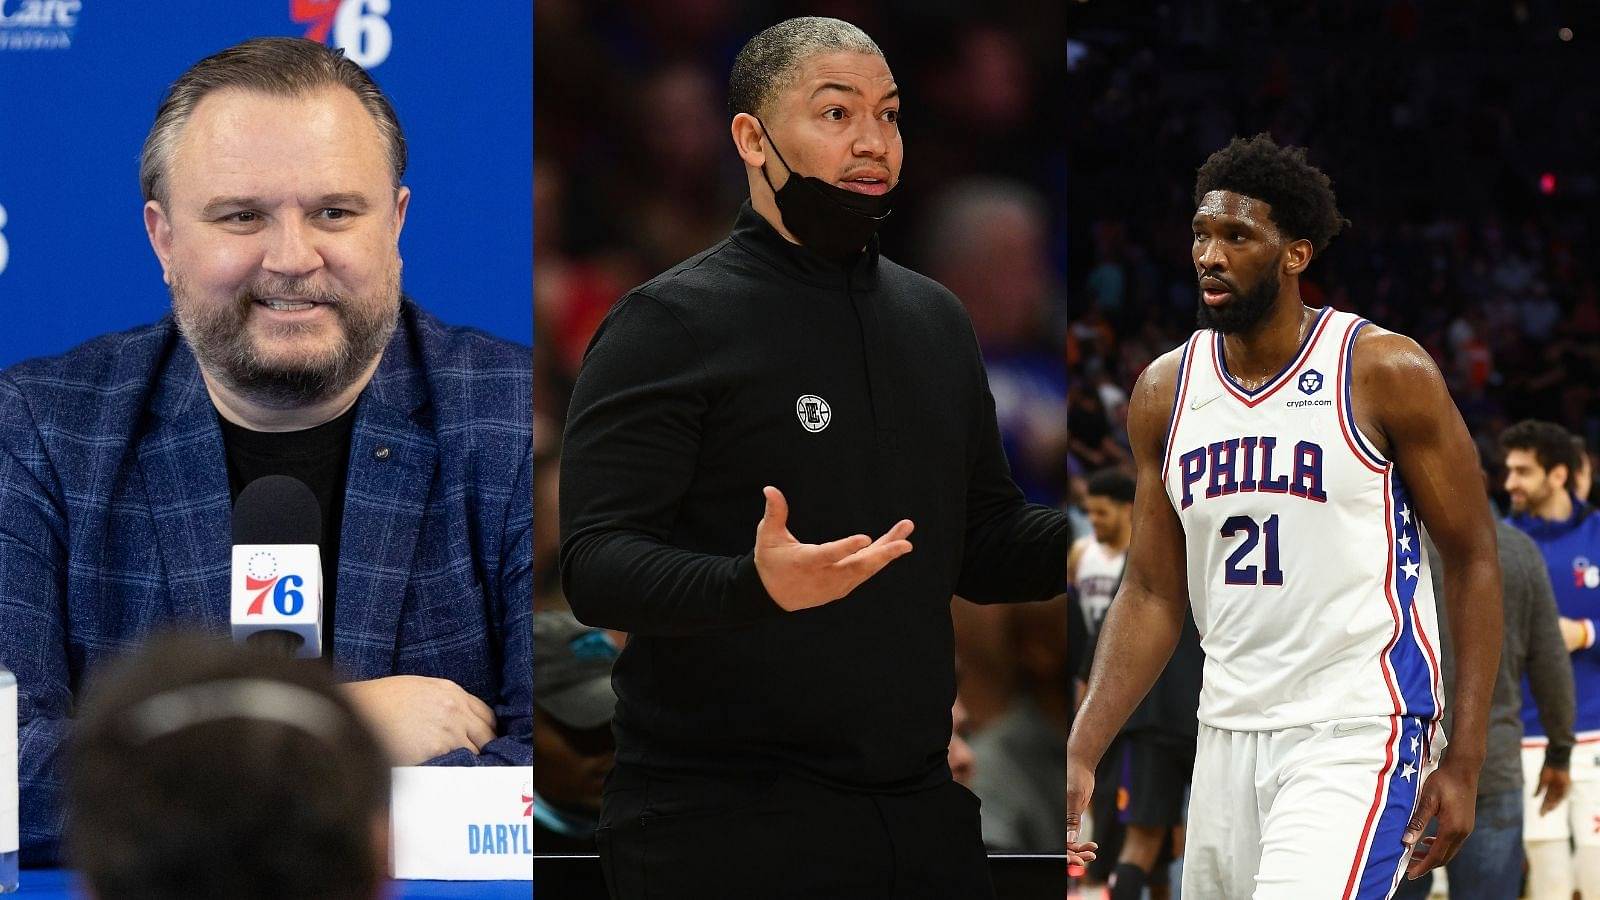 "Oh Ty Lue, so I can’t score without free throws, huh?": Joel Embiid confronted the Clippers coach during the game and left him scared and speechless but now he targets Daryl Morey